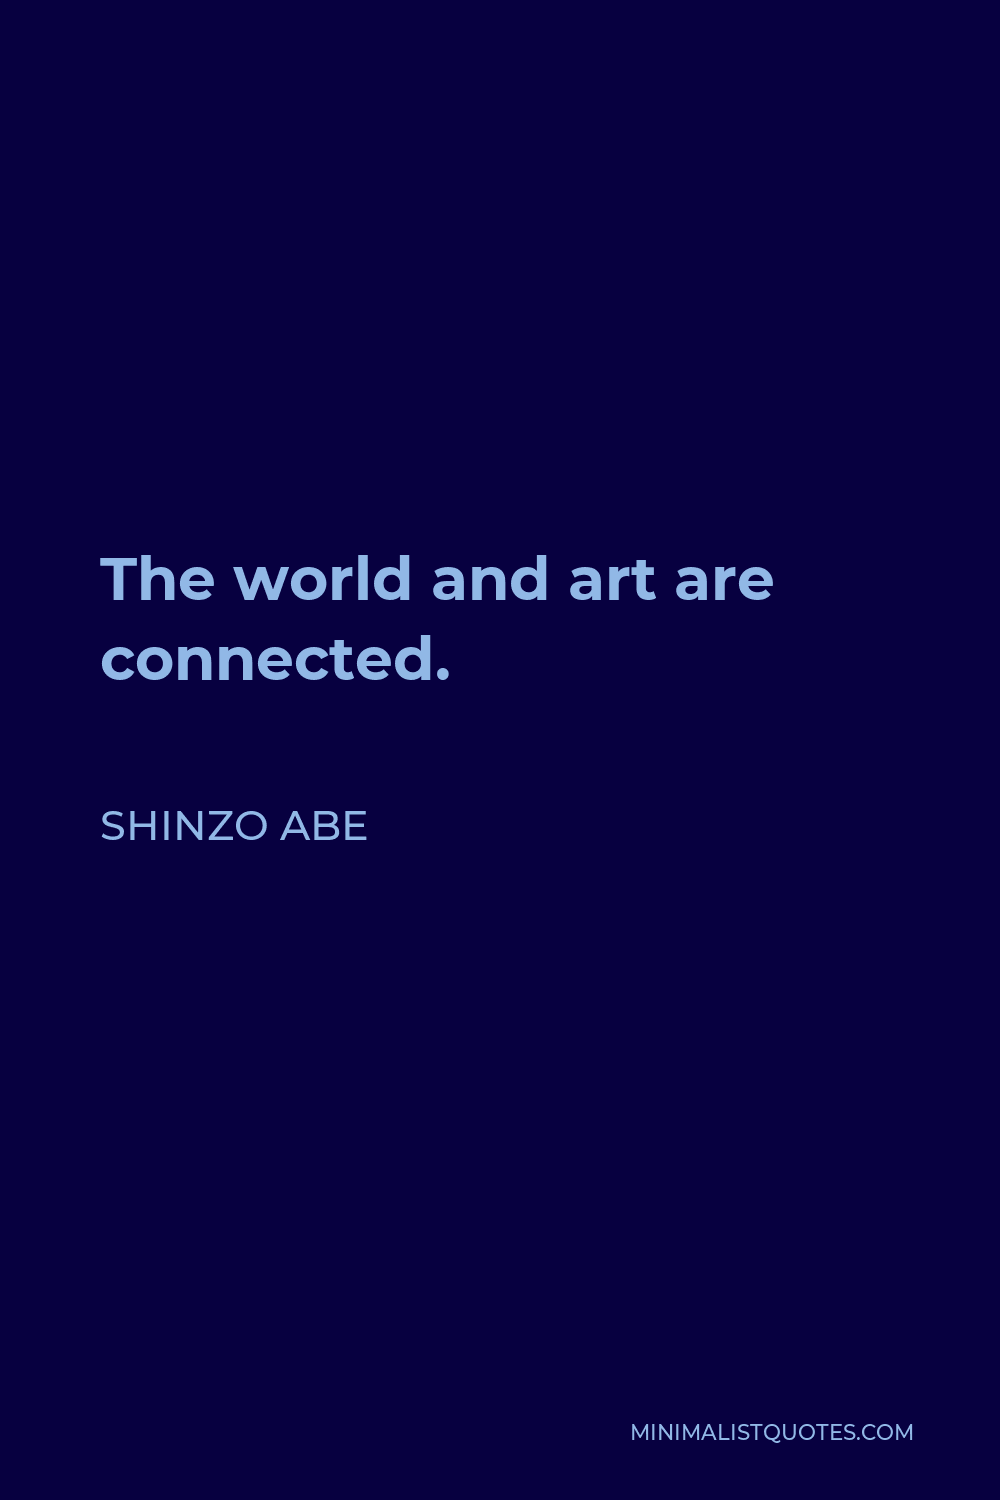 Shinzo Abe Quote - The world and art are connected.